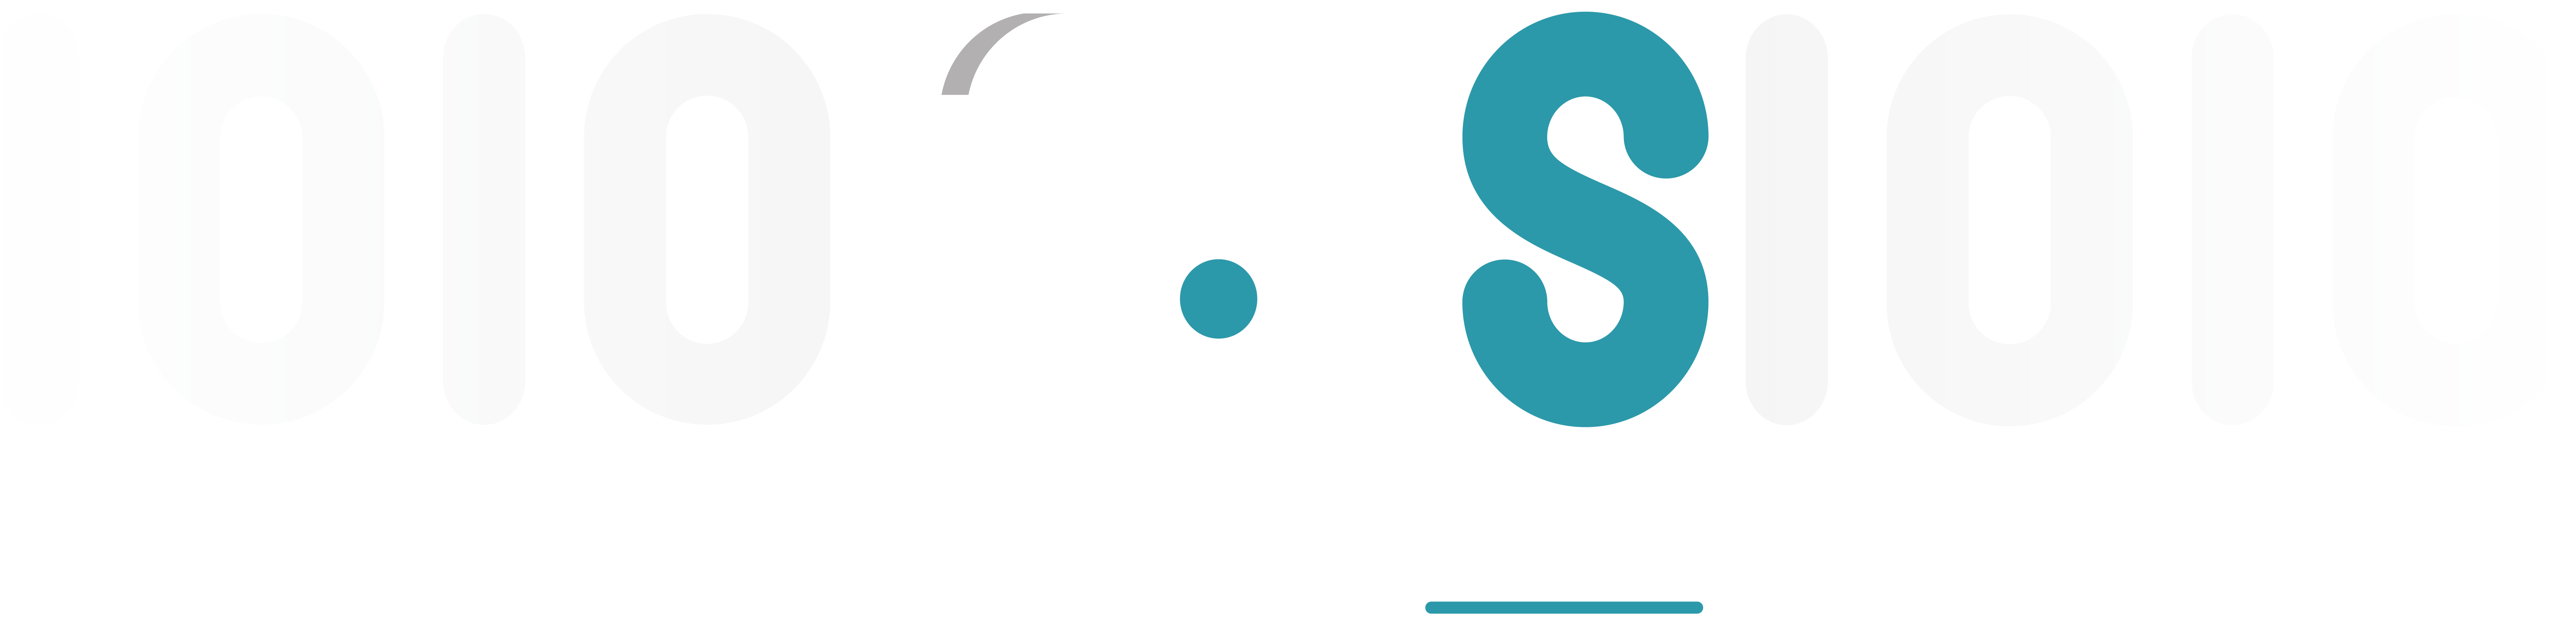 Trusted Security Solutions - TSS